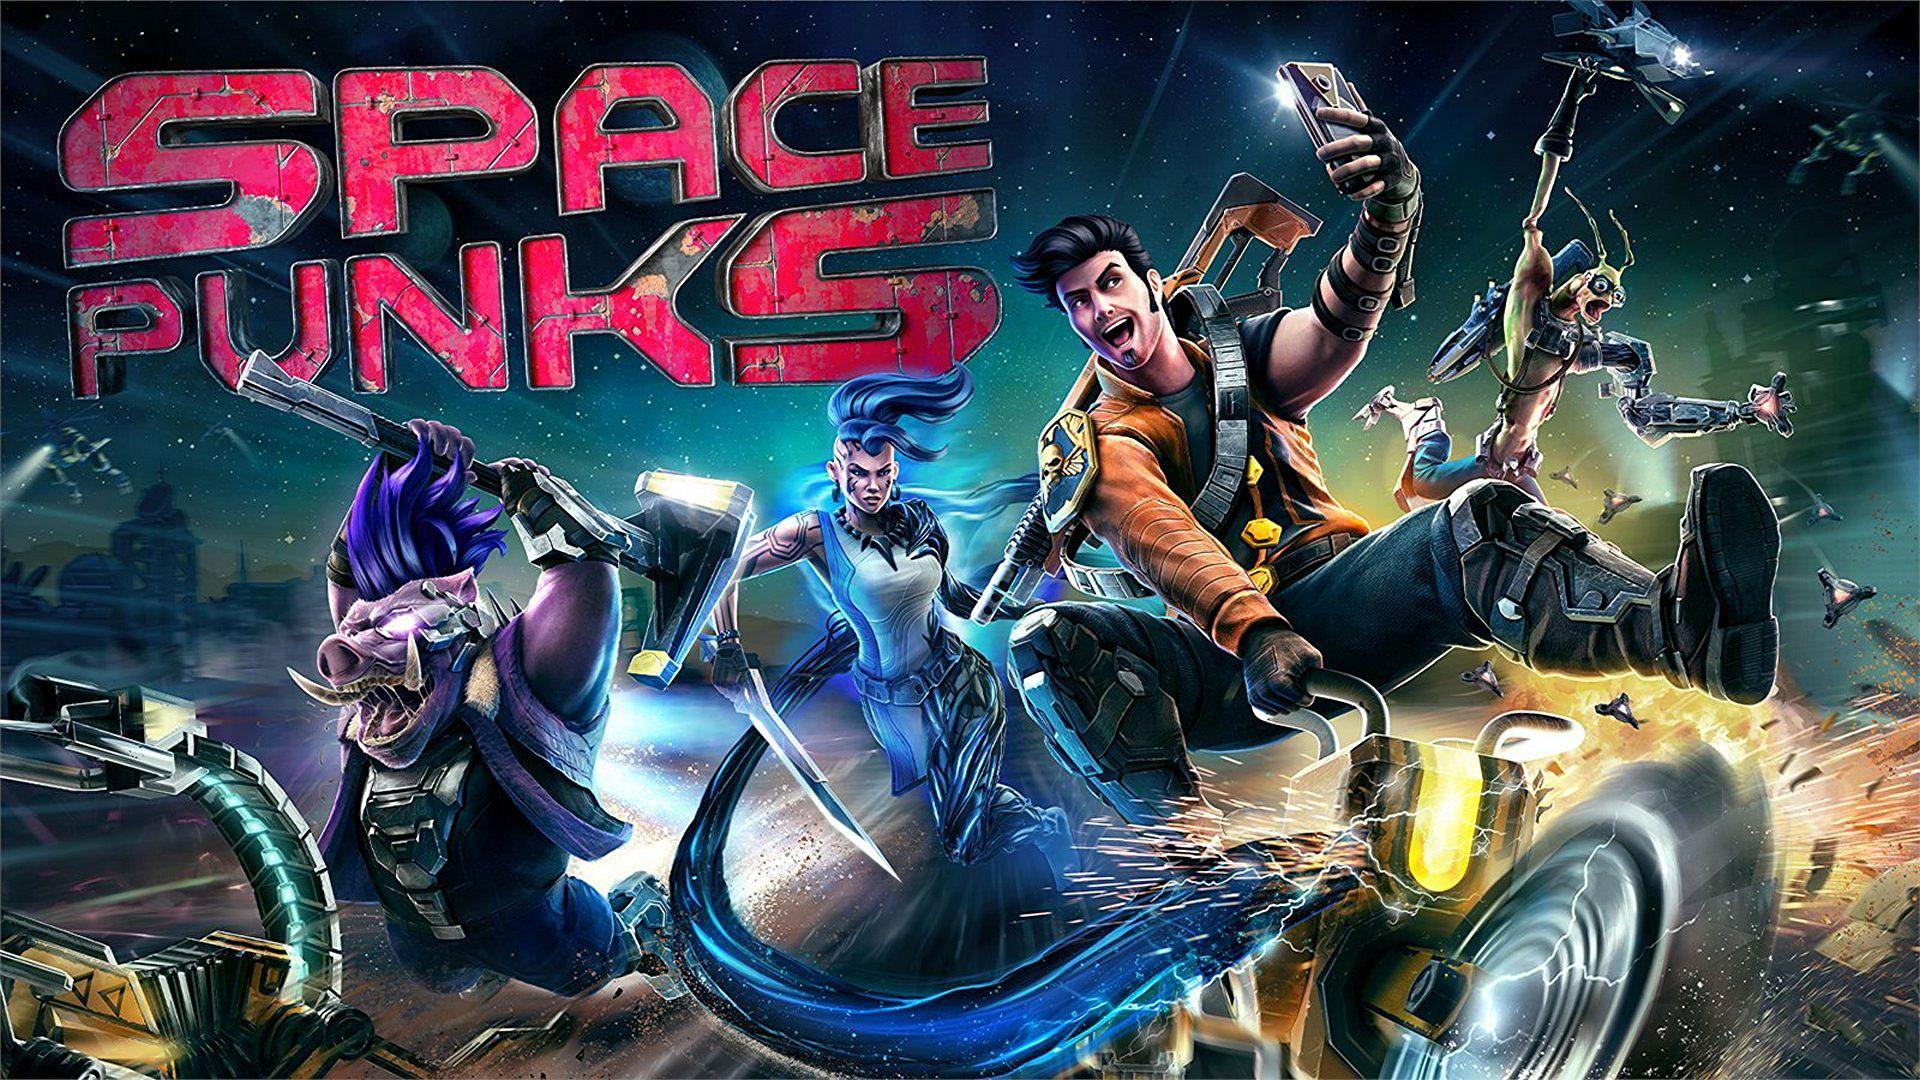 Free Space Punks Wallpaper in 1920x1080